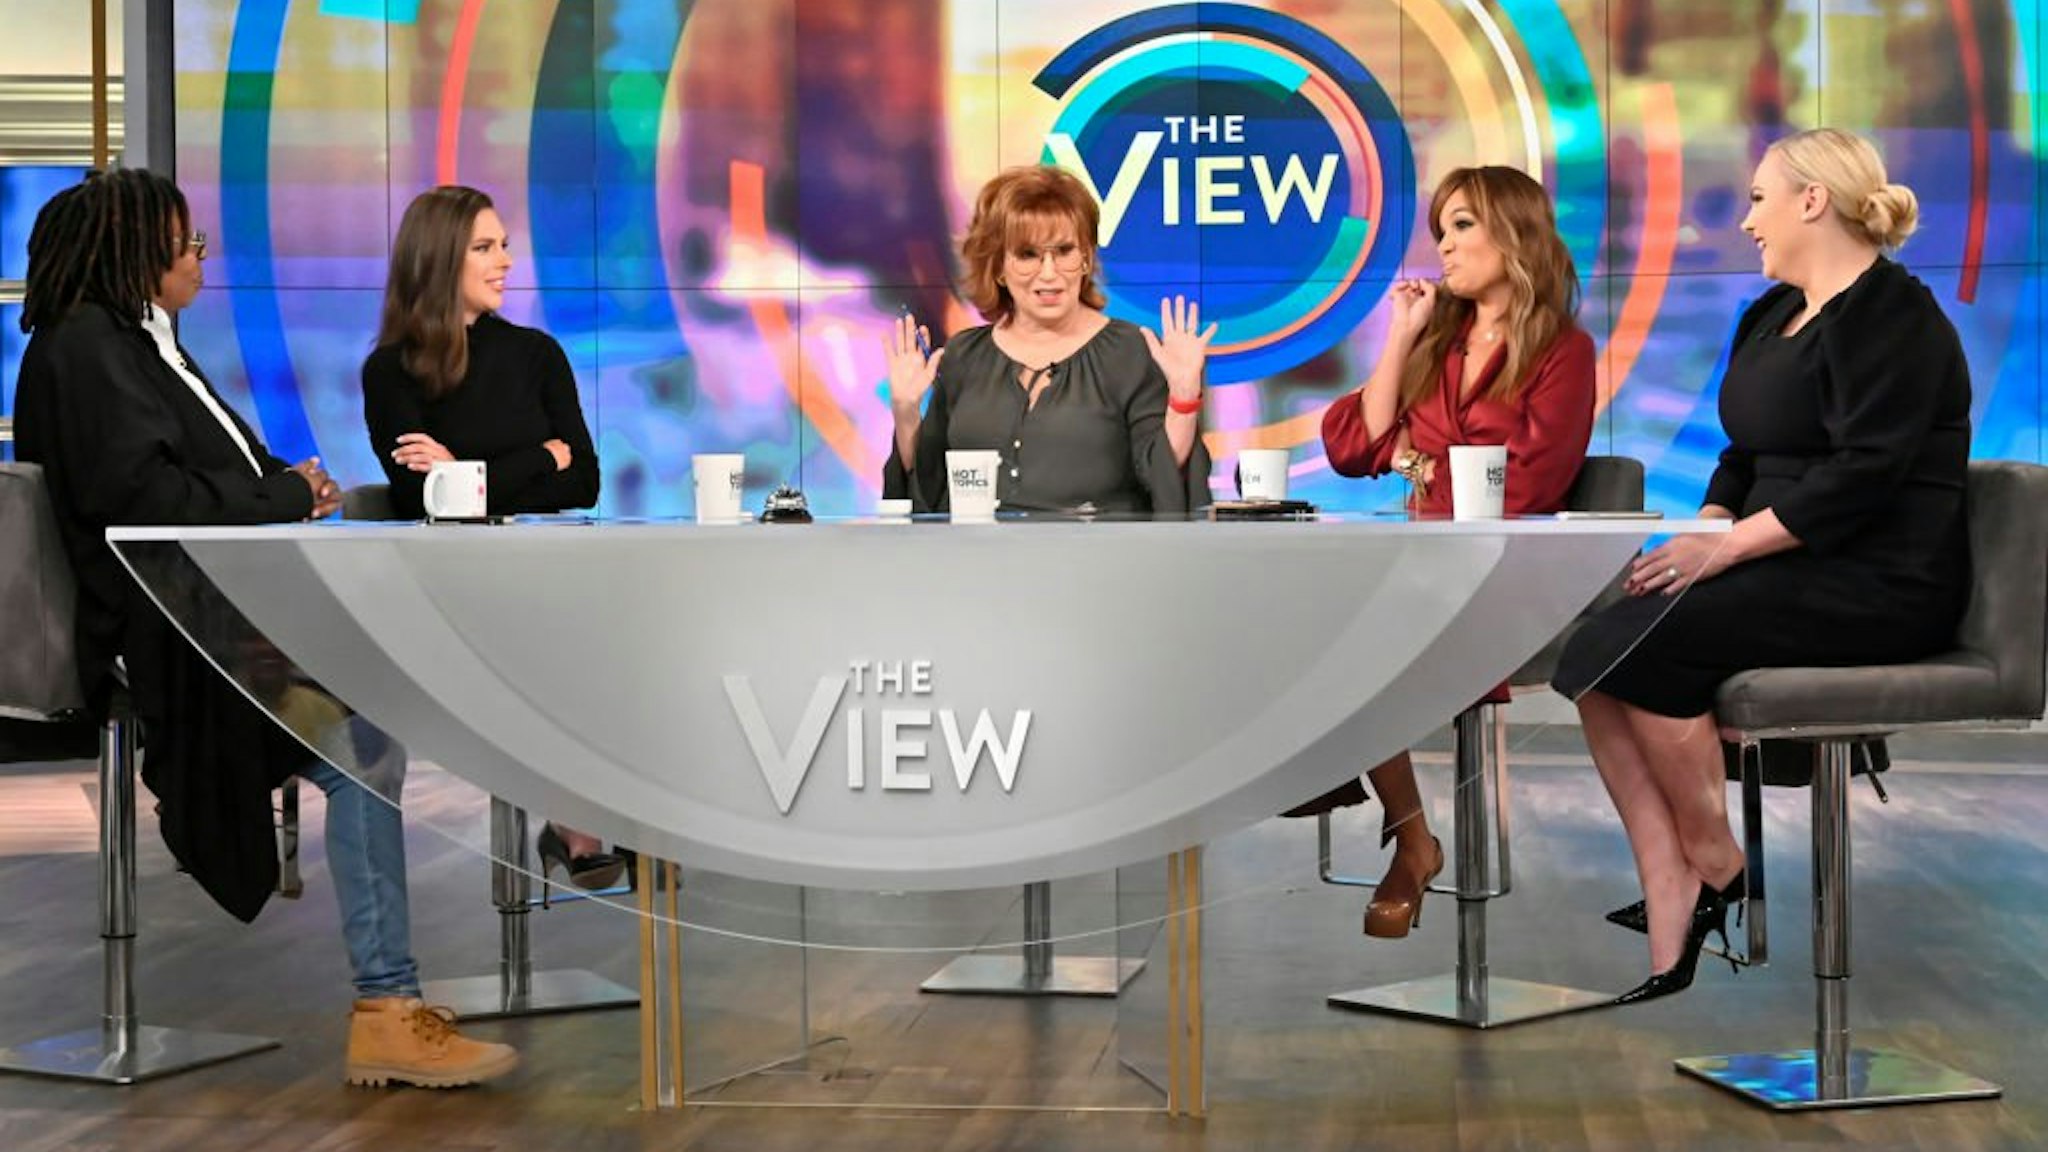 THE VIEW - Stephen King is the guest today, Wednesday, September 11, 2019. "The View" airs Monday-Friday 11am-12pm, ET on ABC. (Jeff Neira/Walt Disney Television via Getty Images) WHOOPI GOLDBERG, ABBY HUNTSMAN, JOY BEHAR, SUNNY HOSTIN, MEGHAN MCCAIN